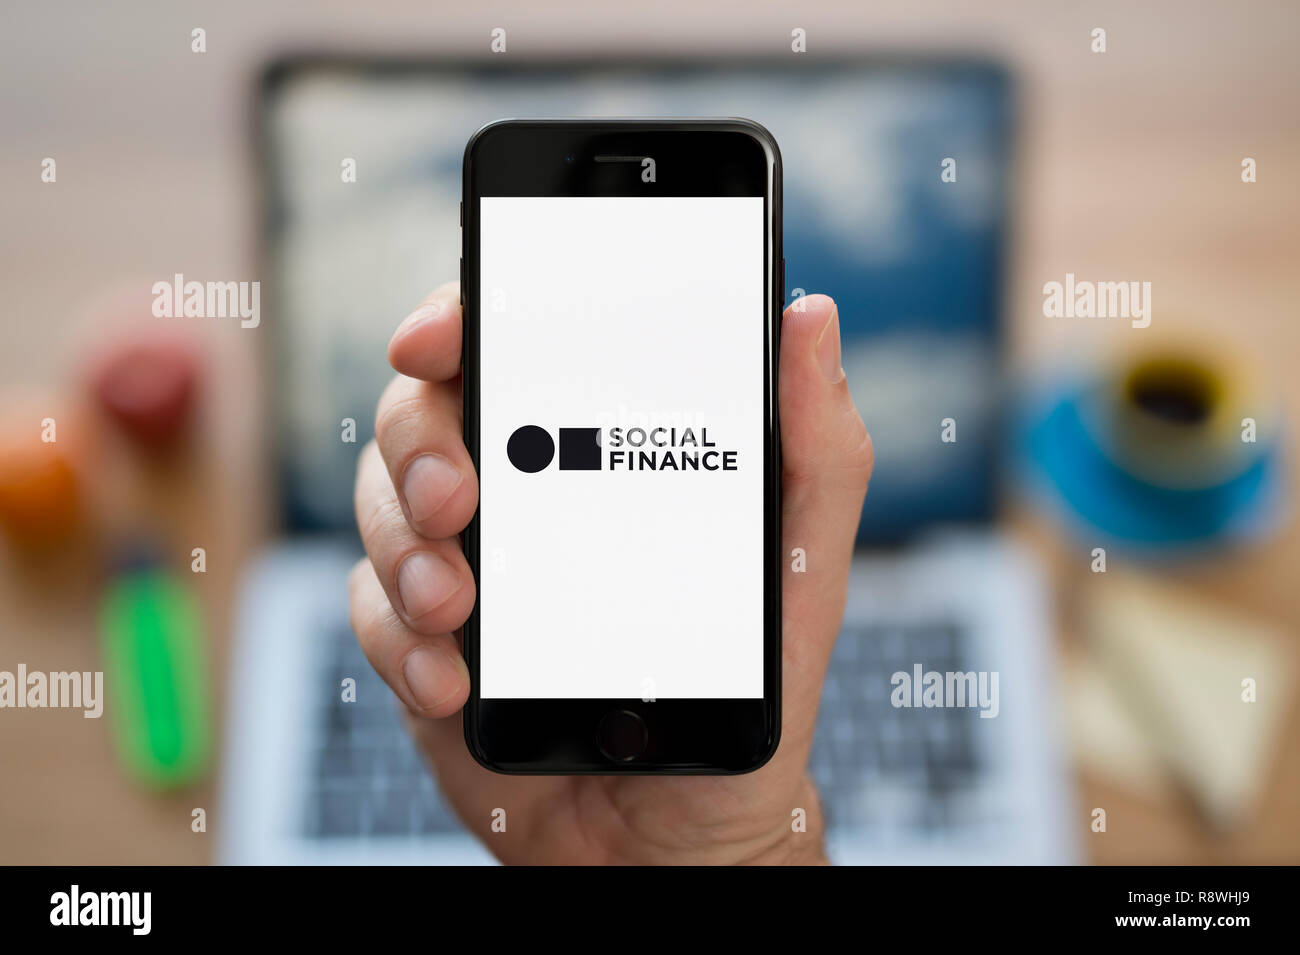 A man looks at his iPhone which displays the Social Finance logo (Editorial use only). Stock Photo